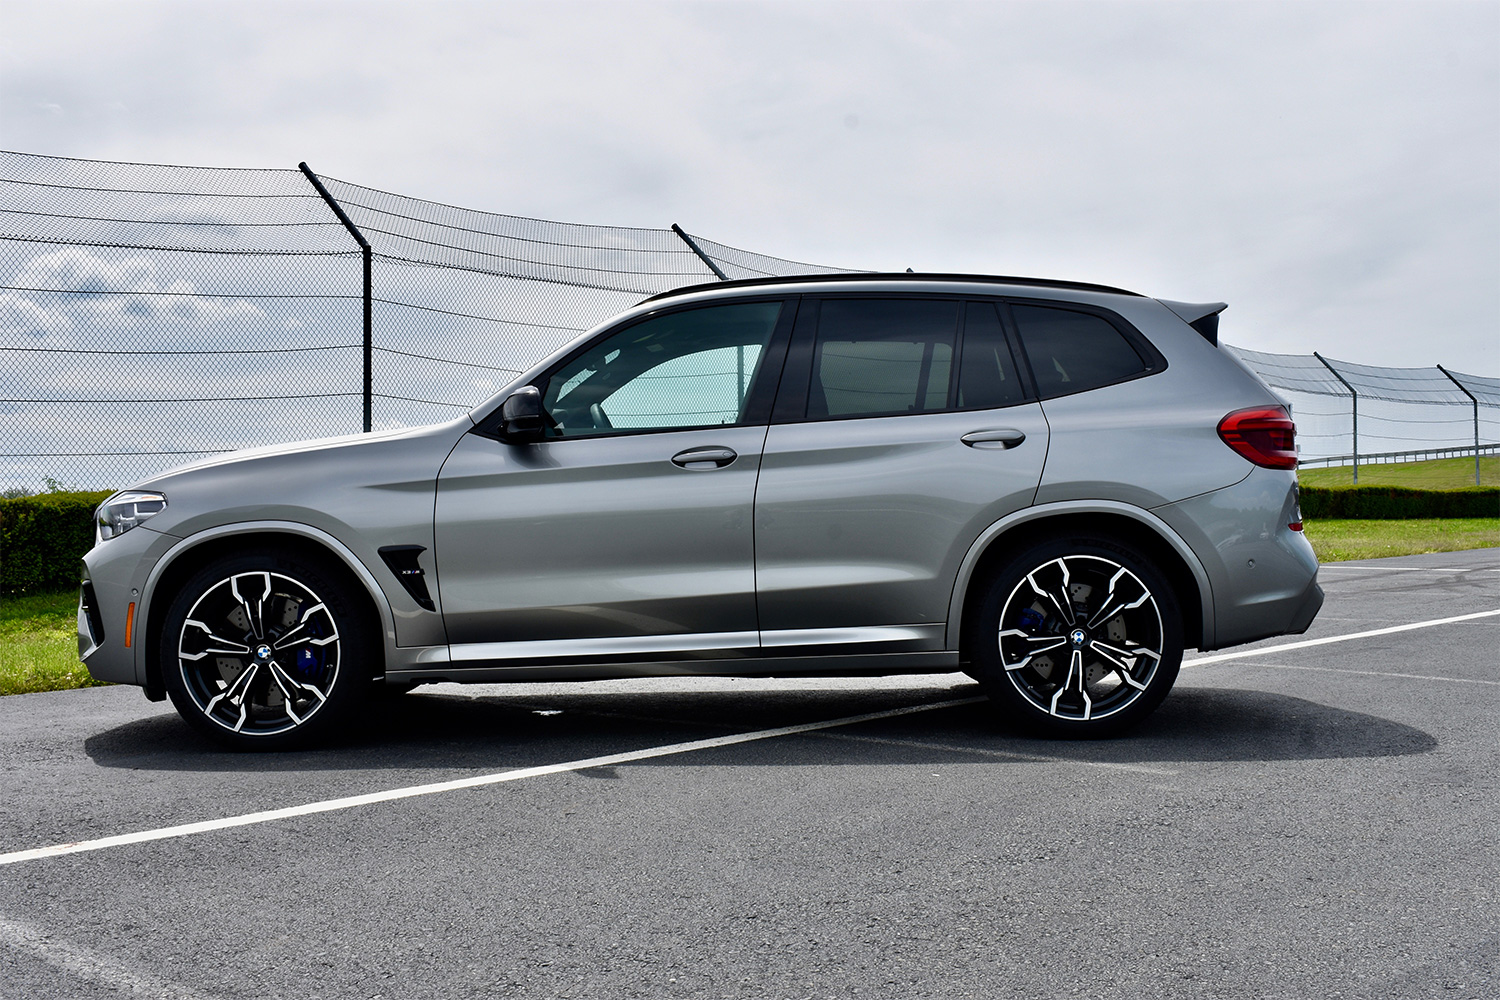 2020 bmw x3 m x4 first drive review 7